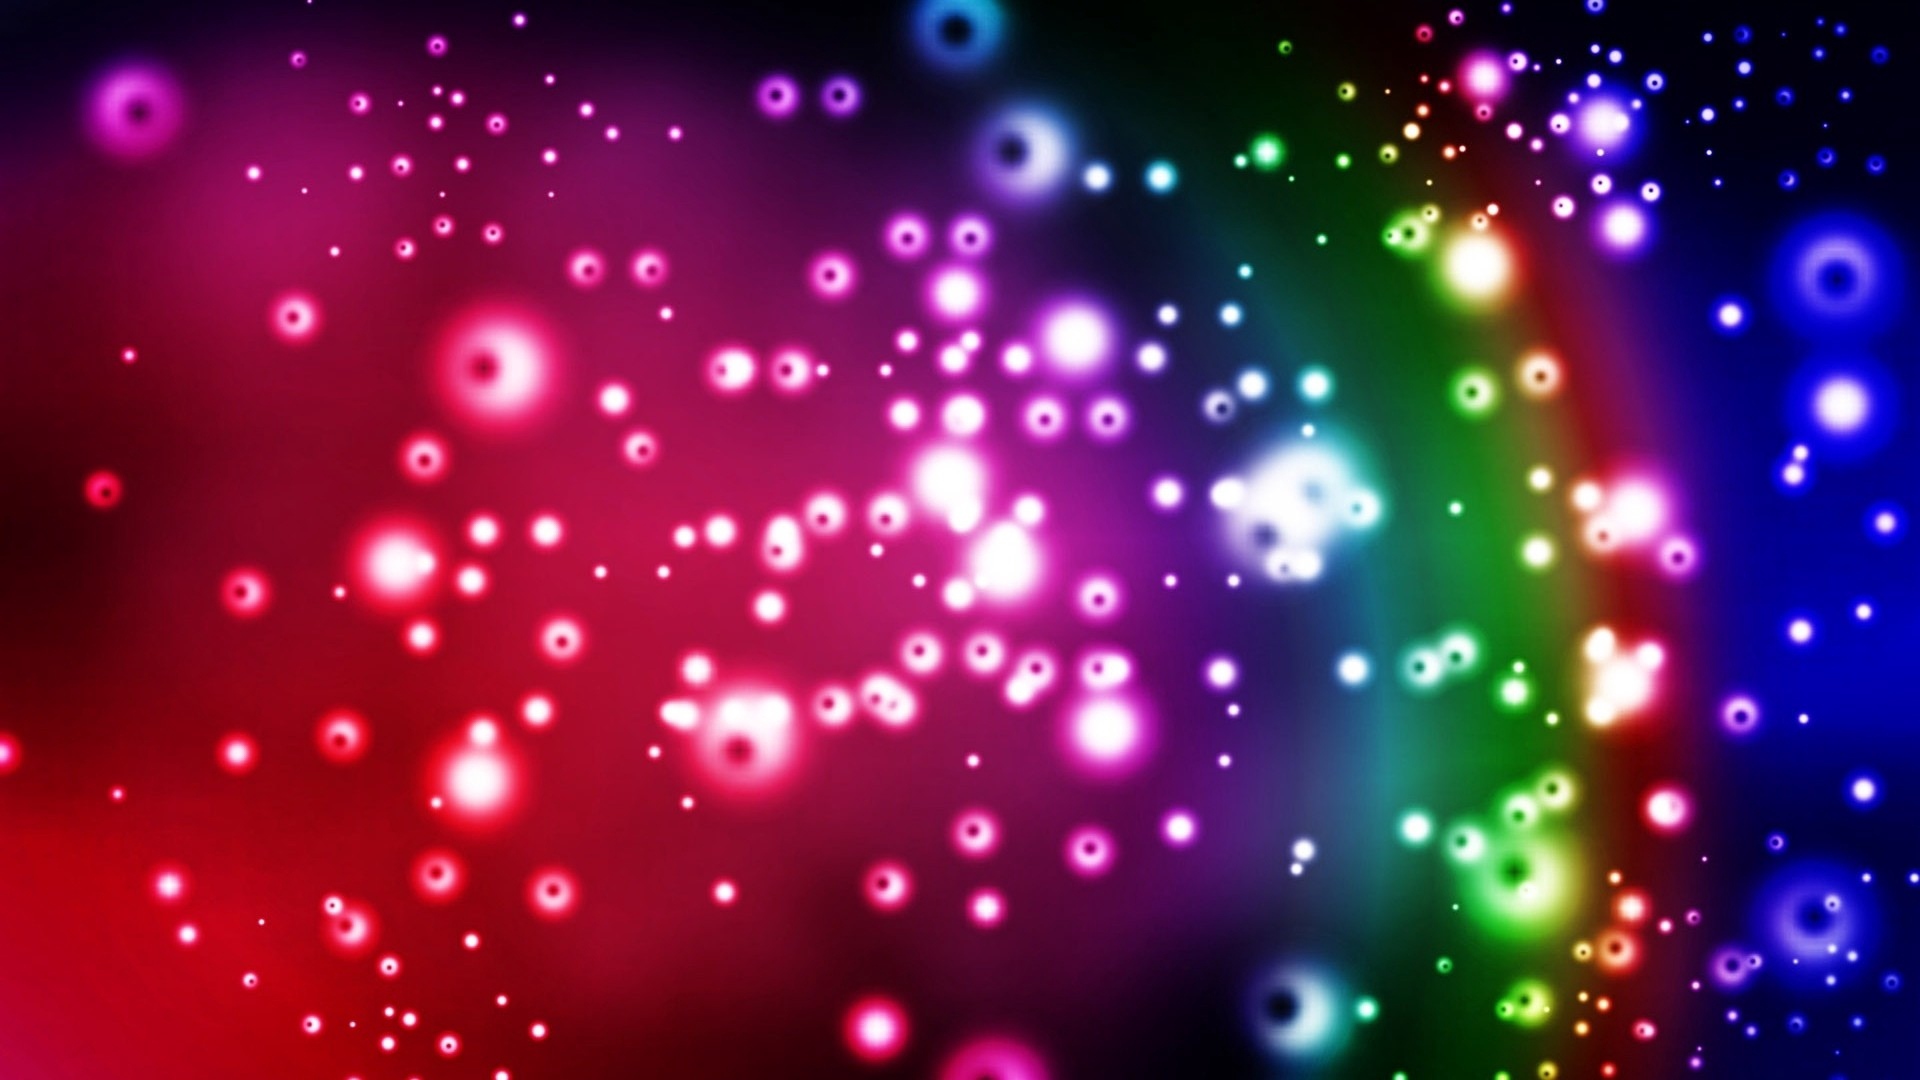 Wallpaper Glare, Rays, Light, Glow, Rainbow - Colorful Cute Cool Backgrounds  - 1920x1080 Wallpaper 